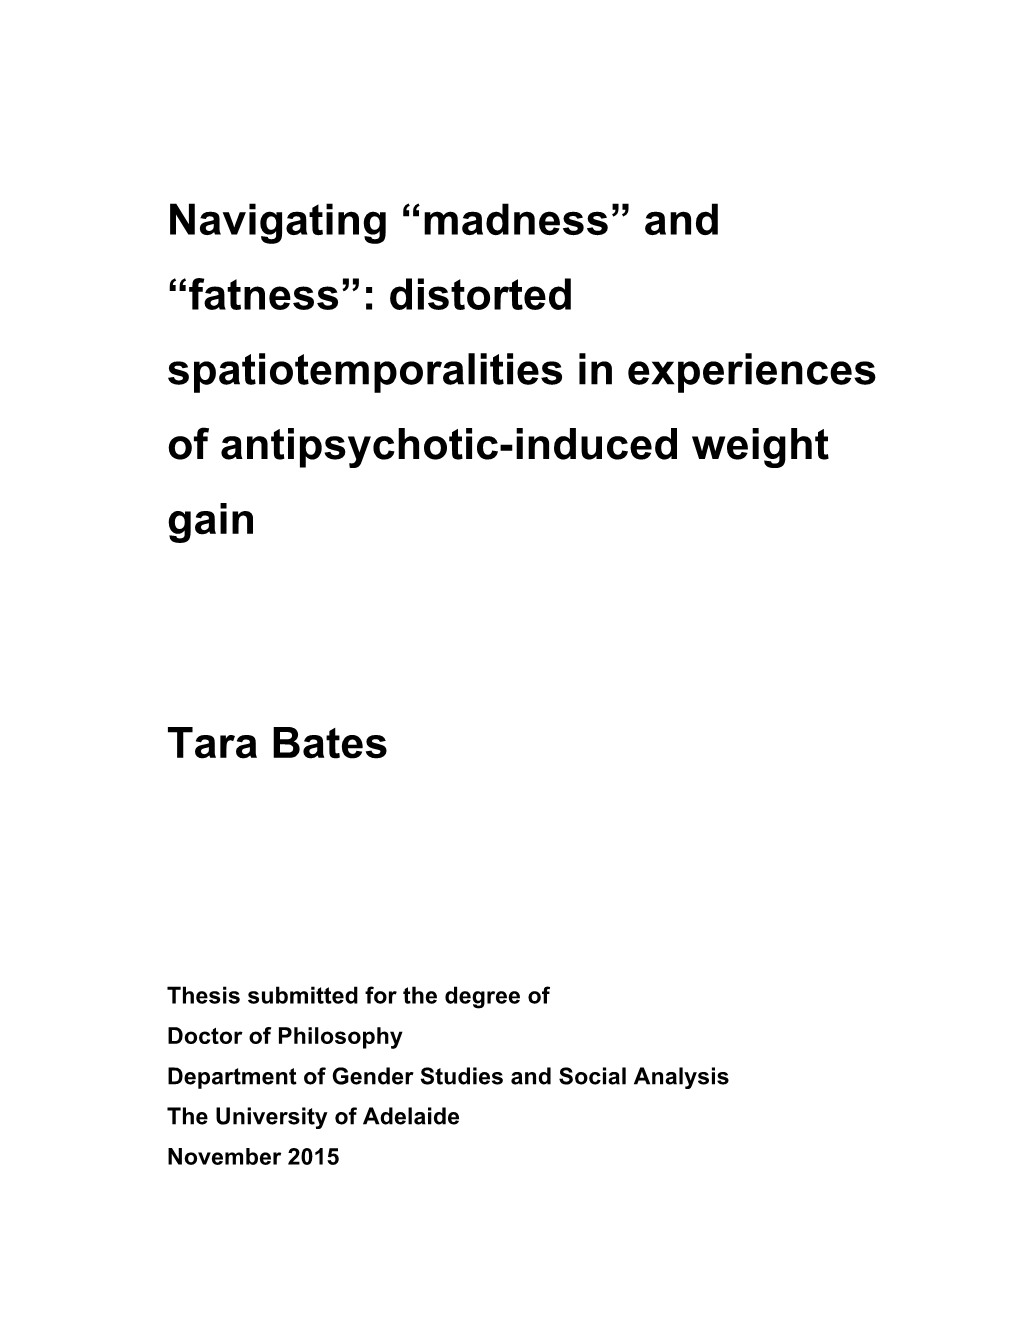 Distorted Spatiotemporalities in Experiences of Antipsychotic-Induced Weight Gain